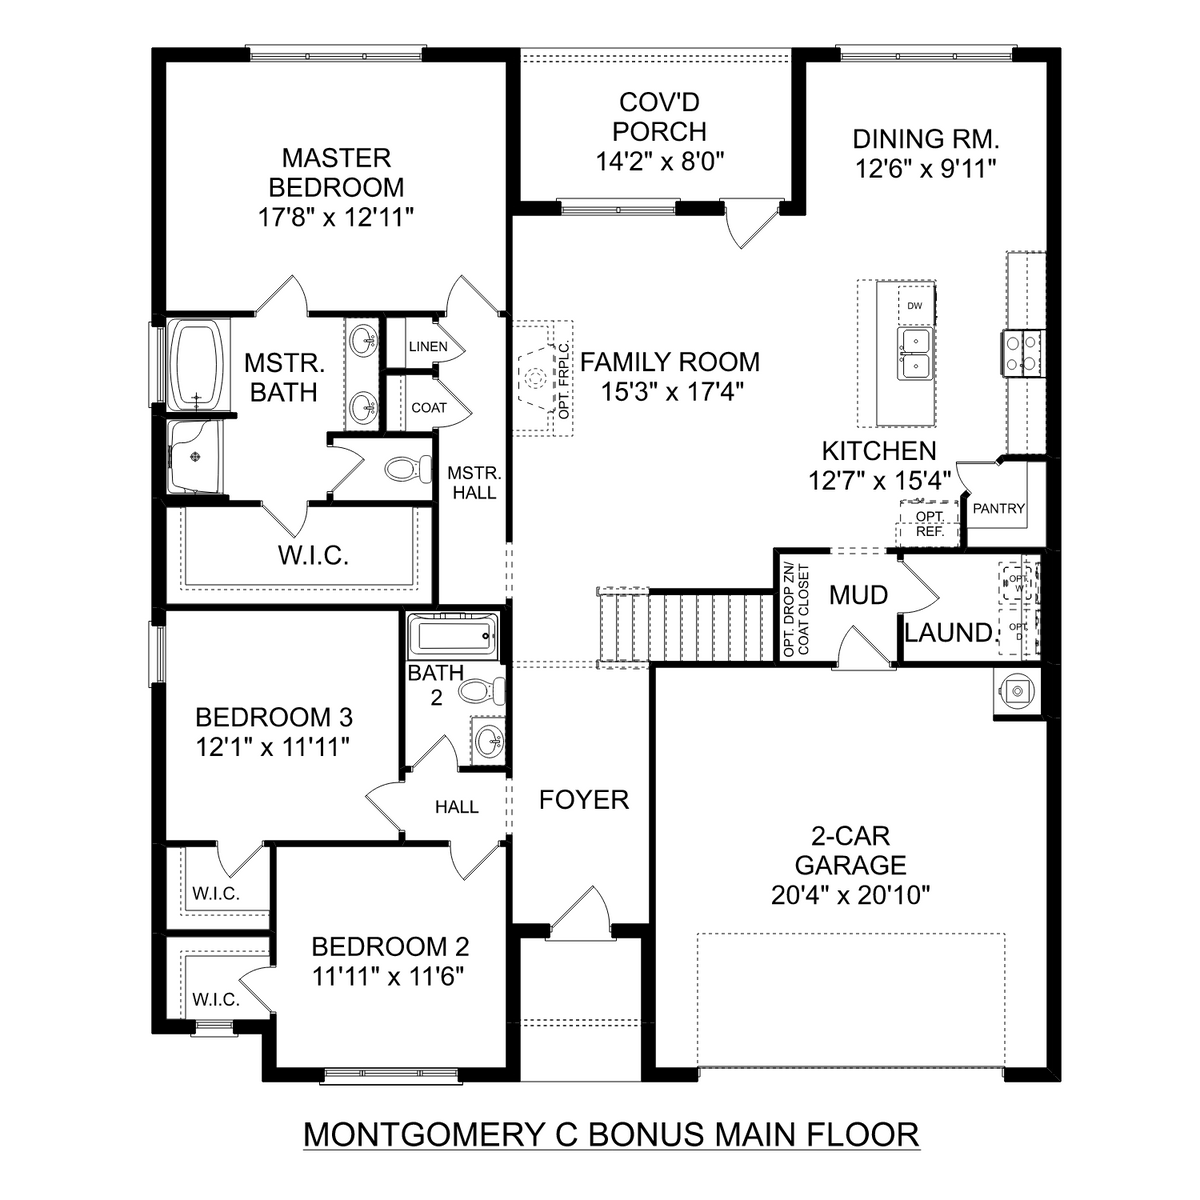 1 - The Montgomery C with Bonus buildable floor plan layout in Davidson Homes' Kendall Downs community.